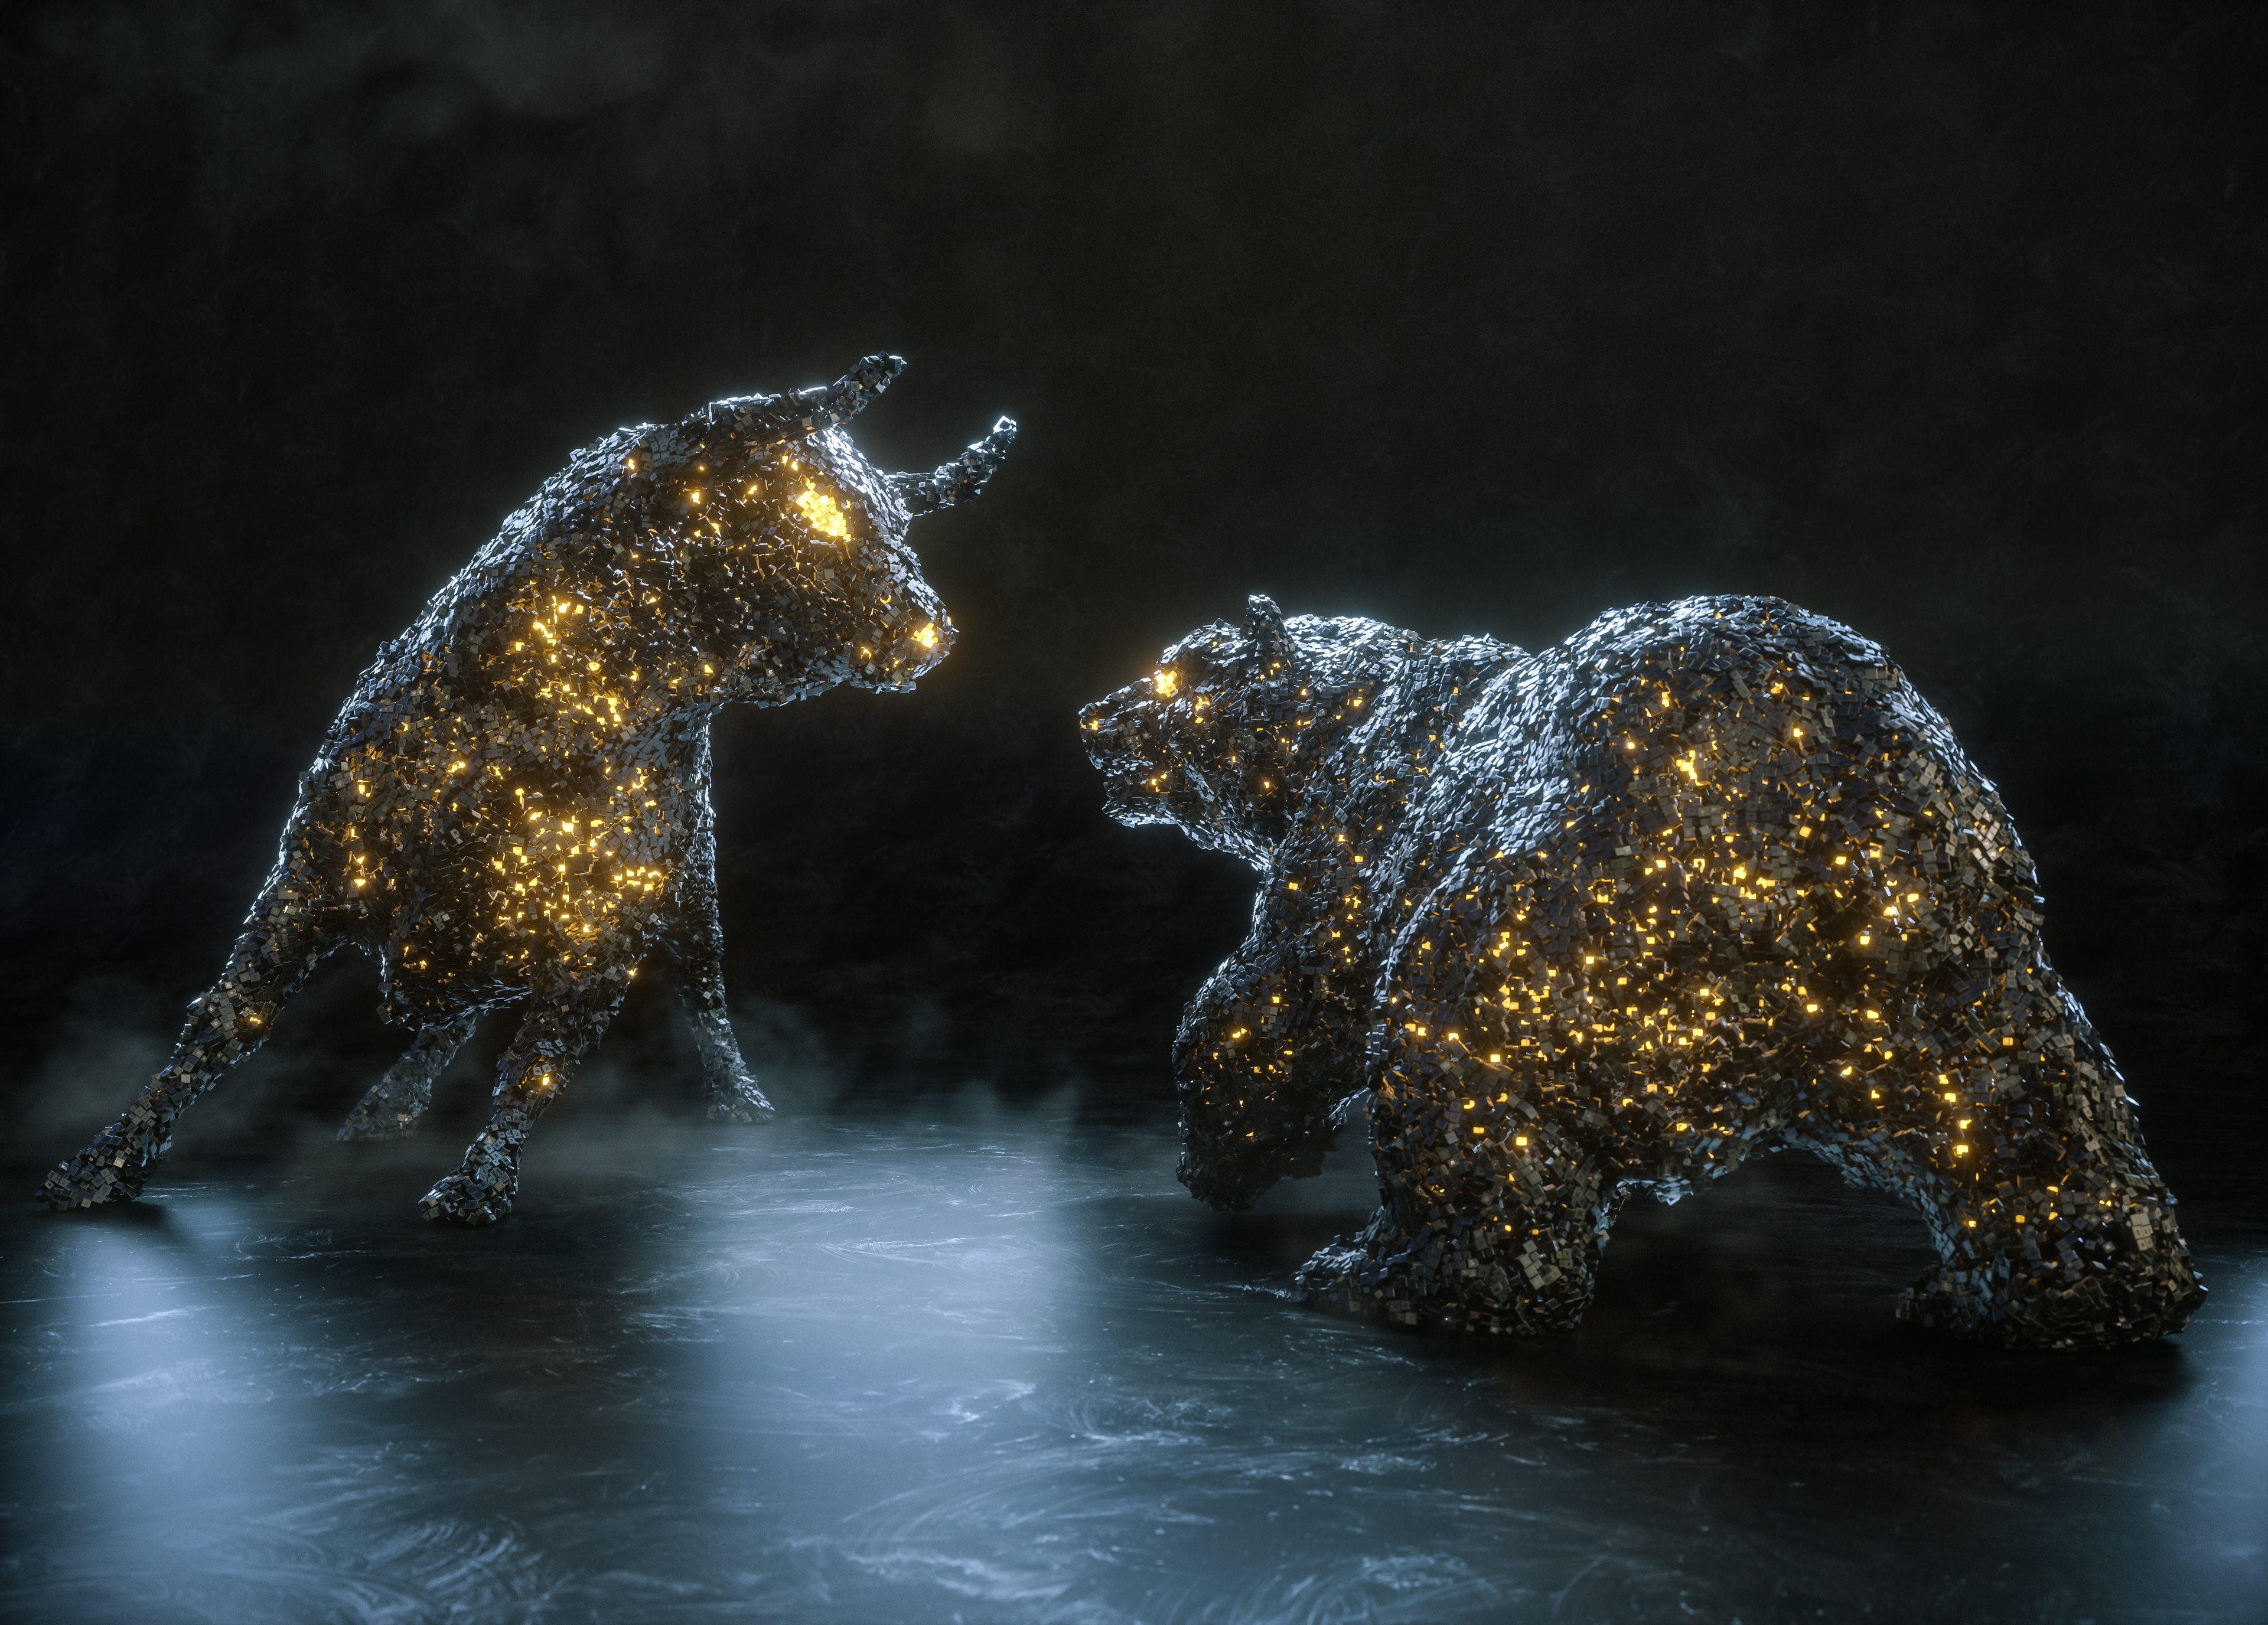 Magictorch, Illustration and Motion vs Bull Markets